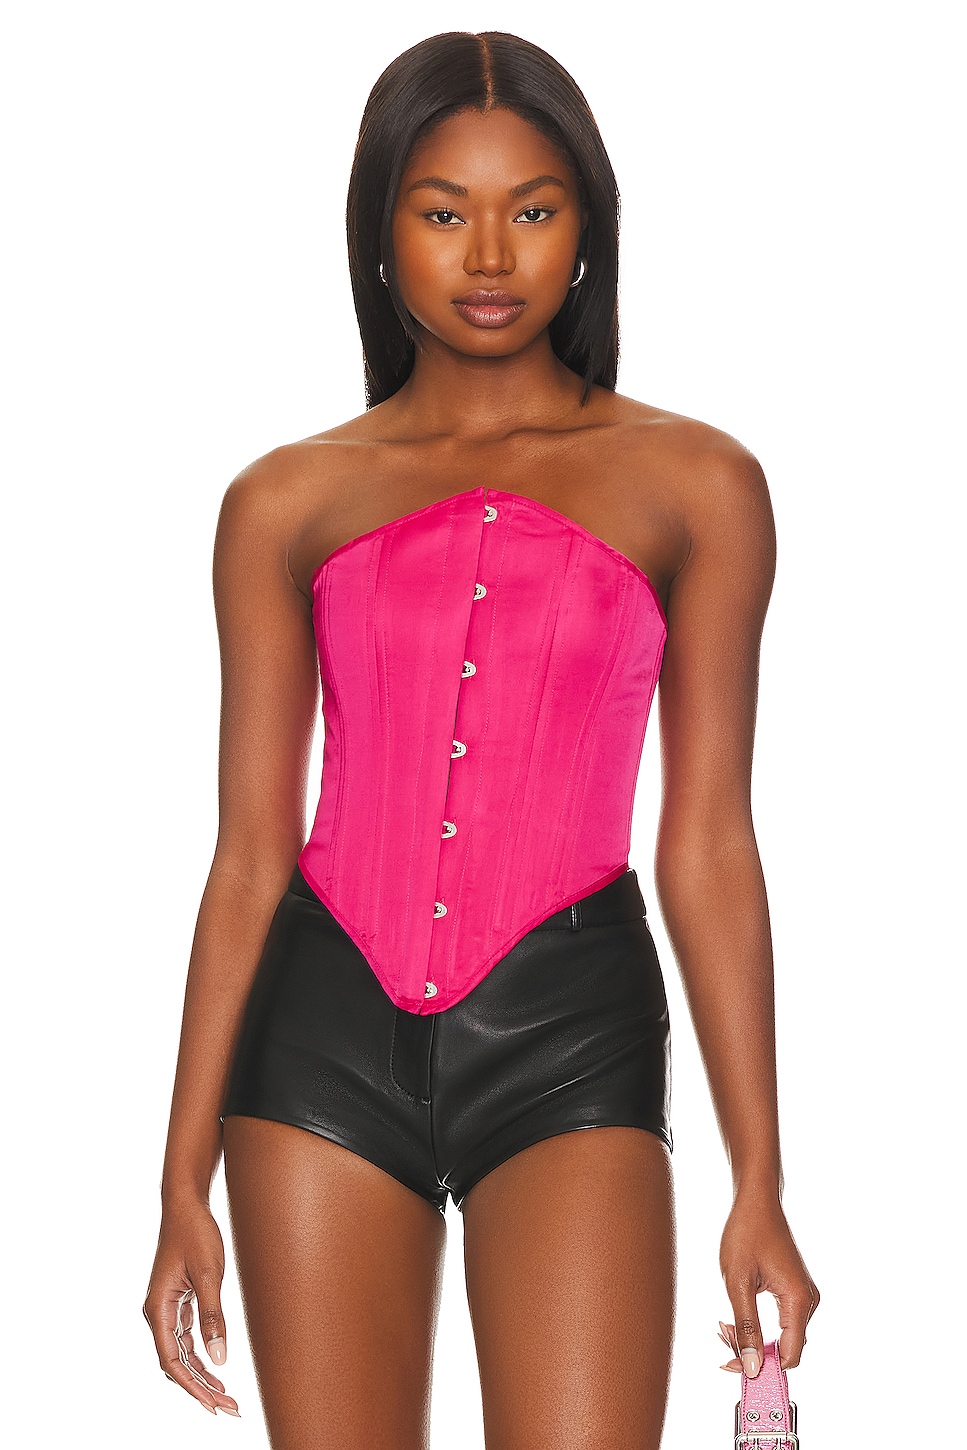 Corset tube top! , This gorgeous tube top from the